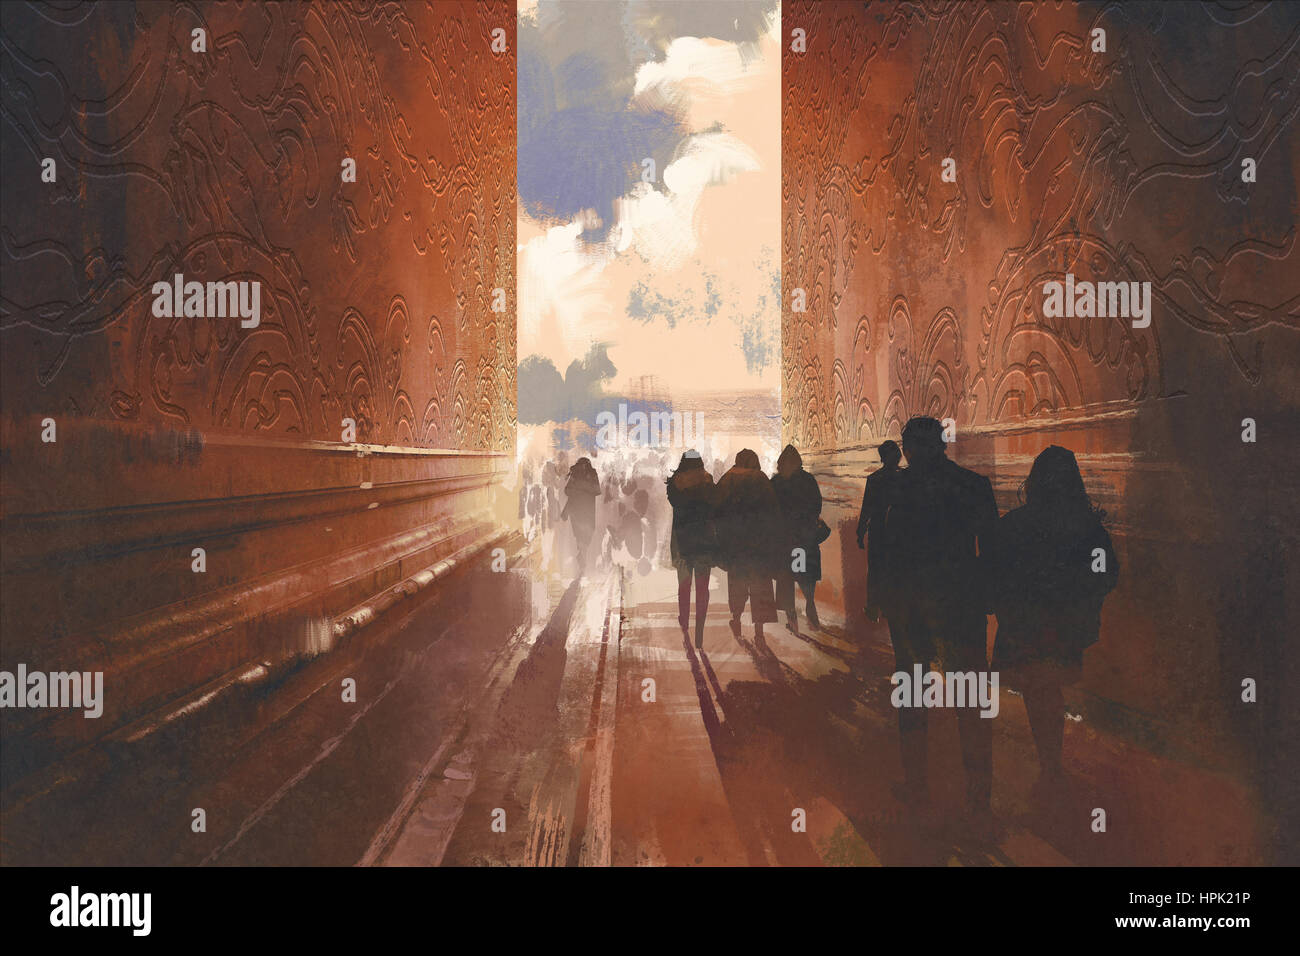 people walking on the narrow alley with graphic pattern on the walls,concept of way to beautiful place,illustration painting Stock Photo